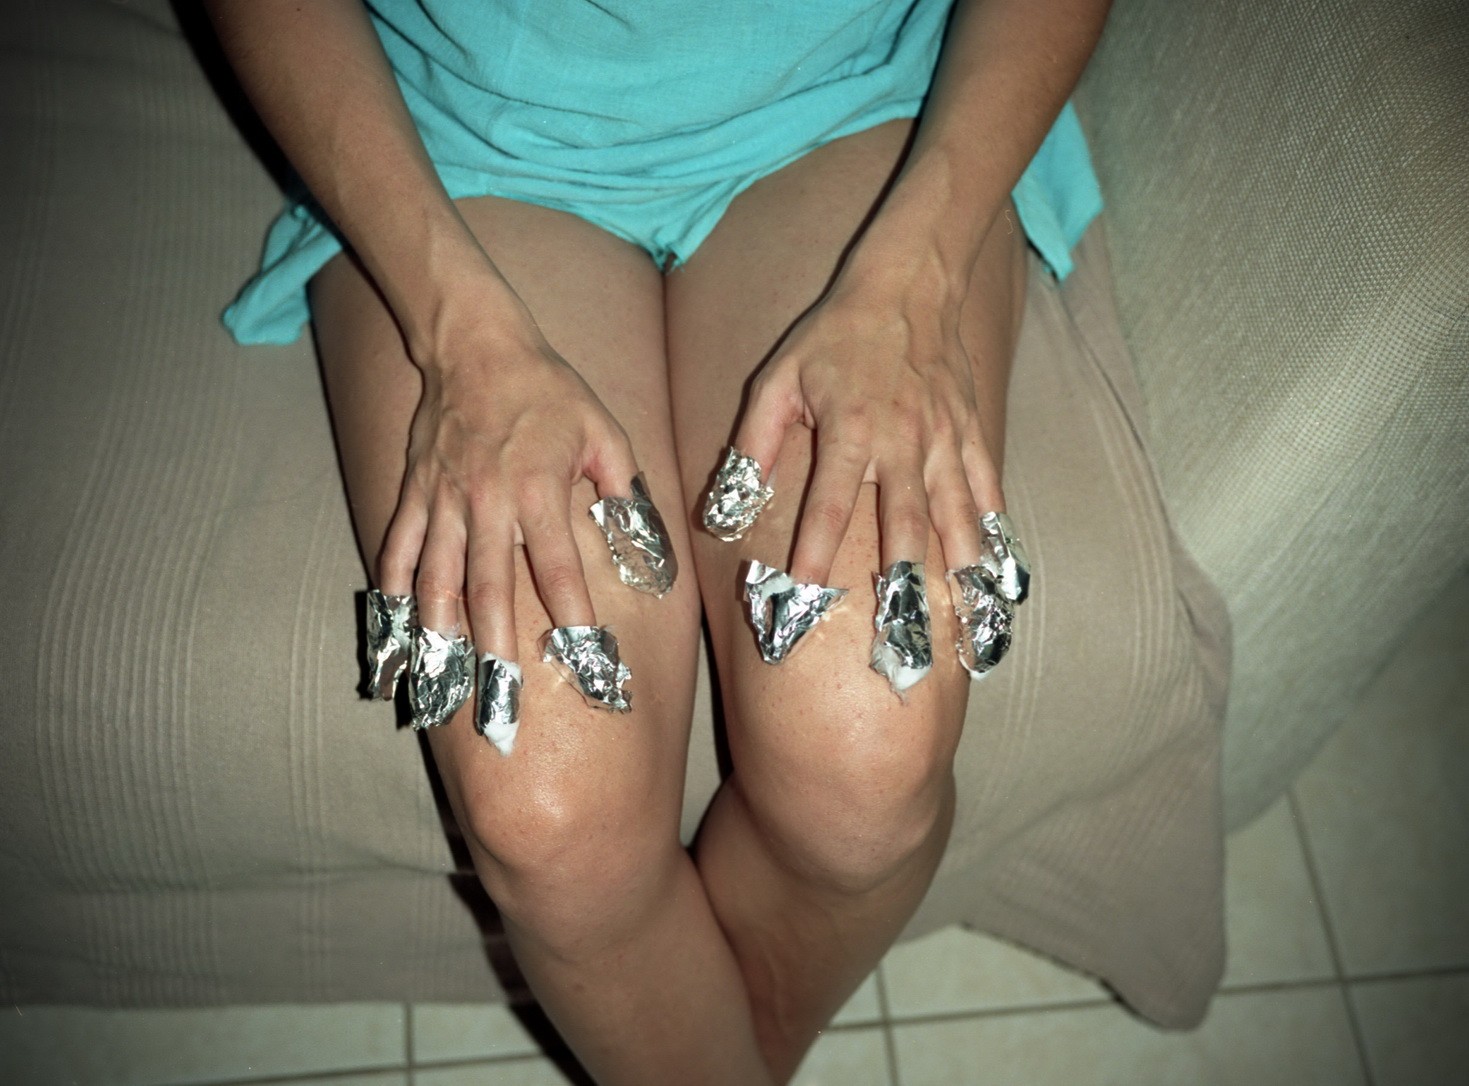 4.Silver nails resize